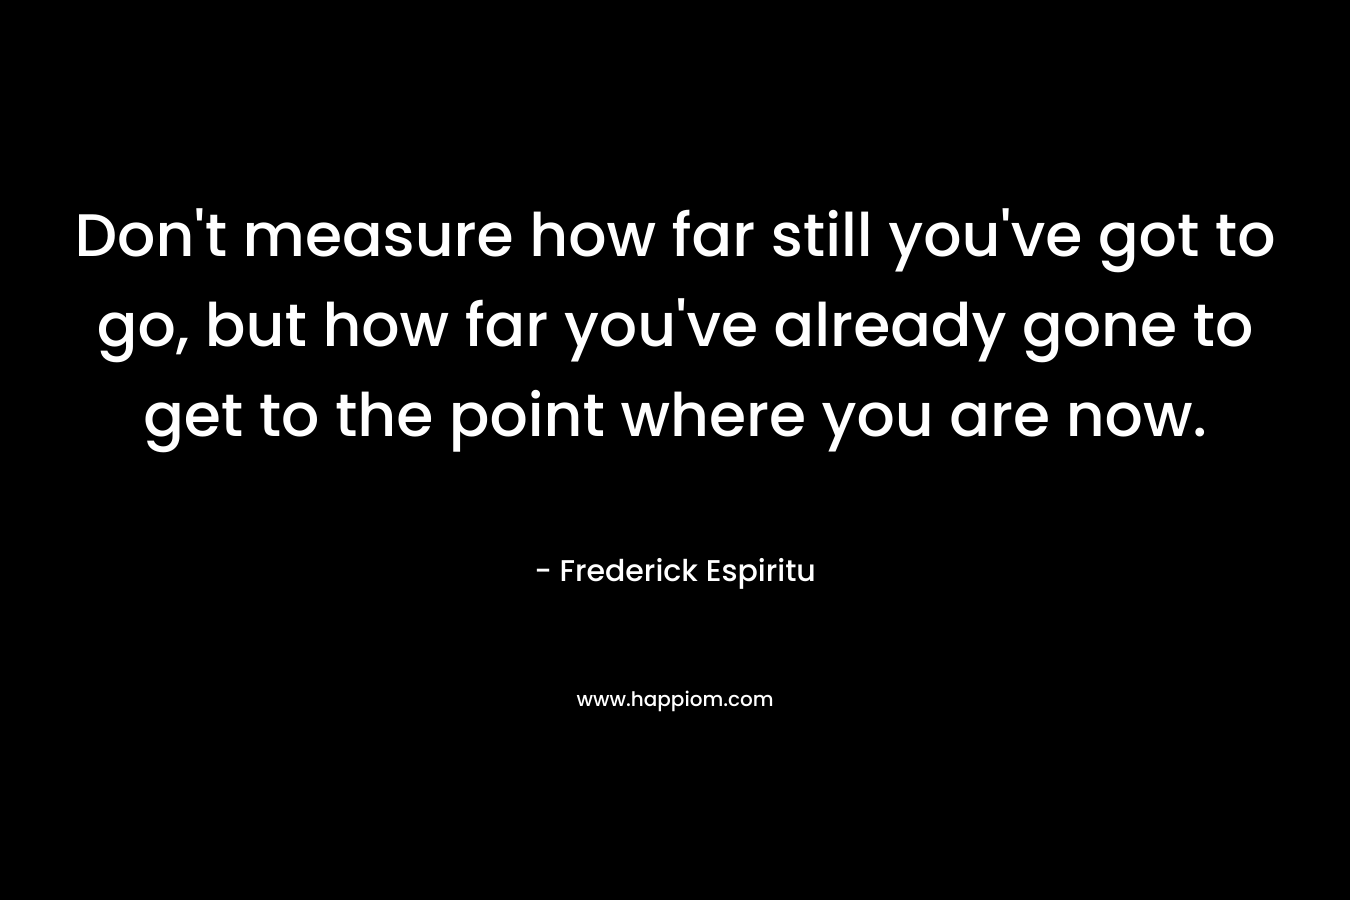 Don't measure how far still you've got to go, but how far you've already gone to get to the point where you are now.